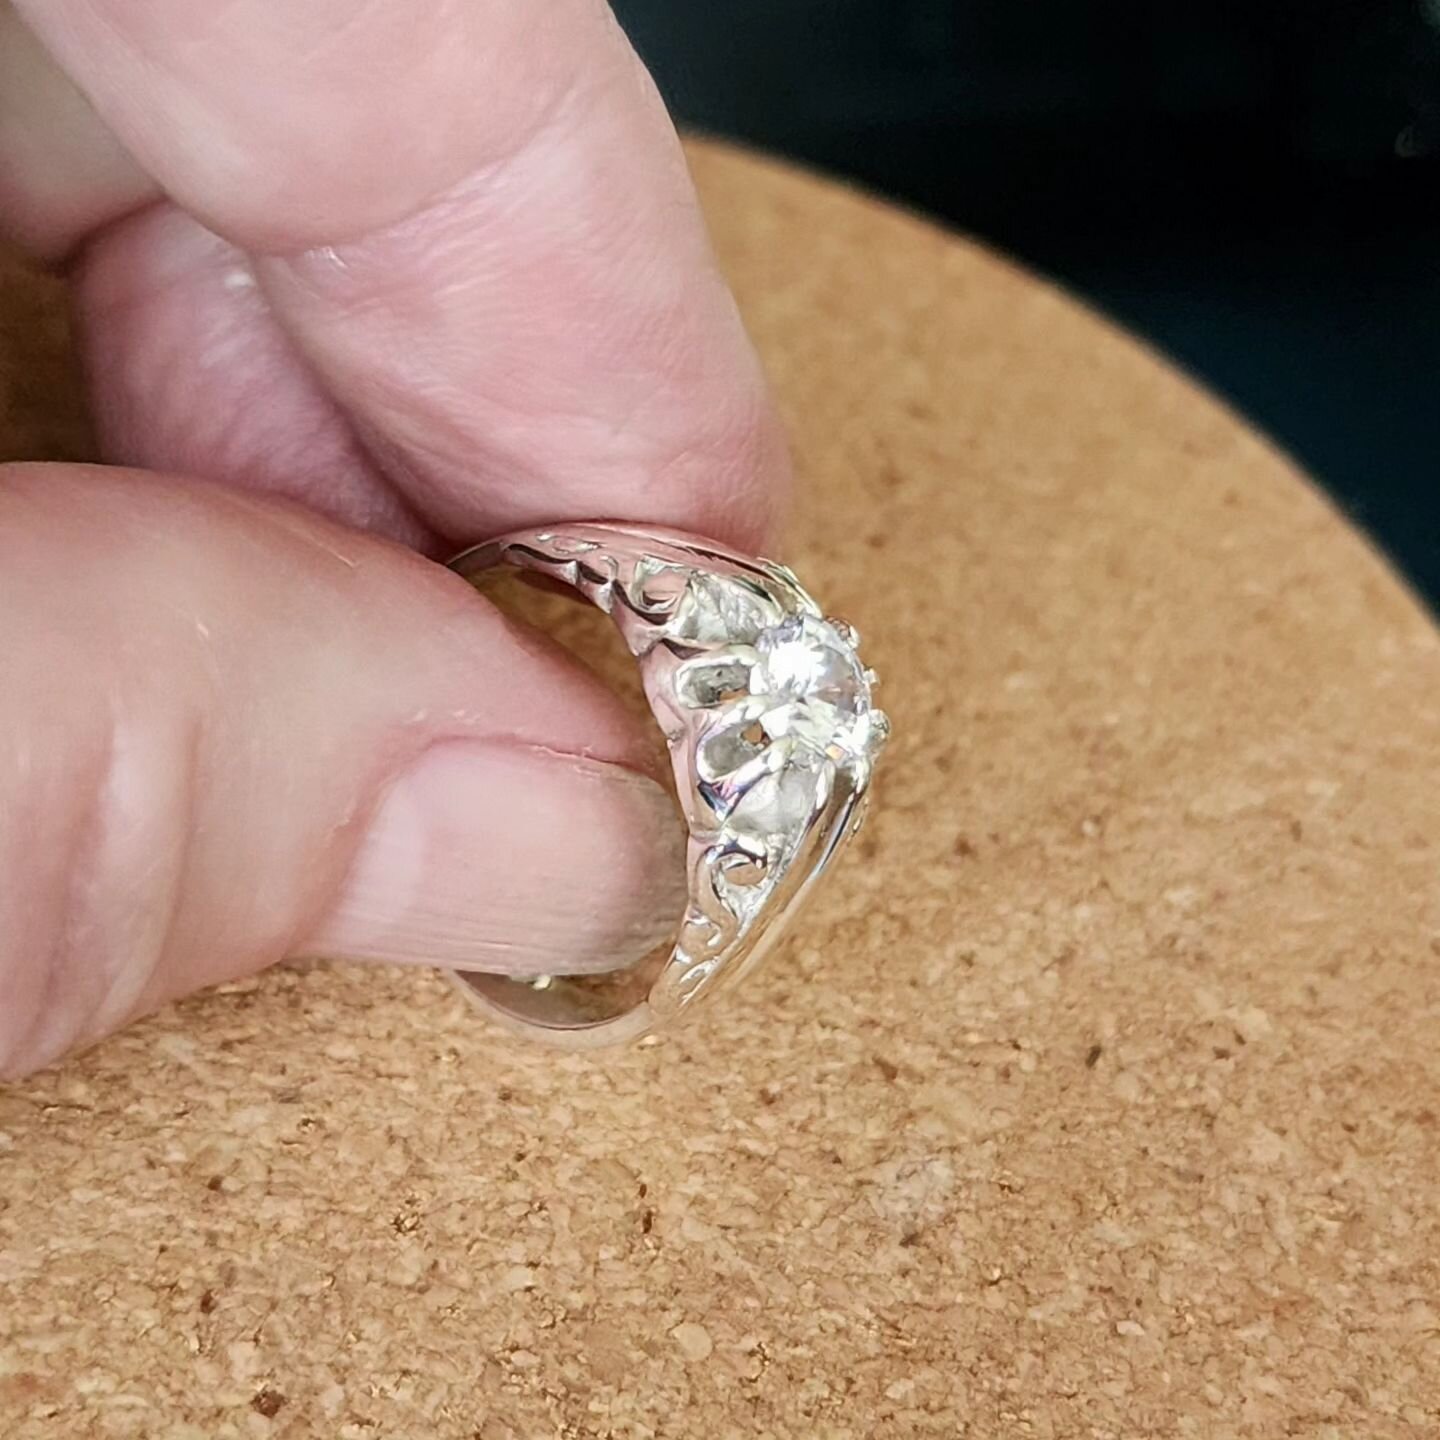 Last week, I attended a lost wax casting class taught by Steve Bostwick and his wife Cynthia at William Holland Lapidary. This ring was one that I cast. I had the CZ from @pepetools_usa with me. Even without doing any finishing to the rough cast, eve